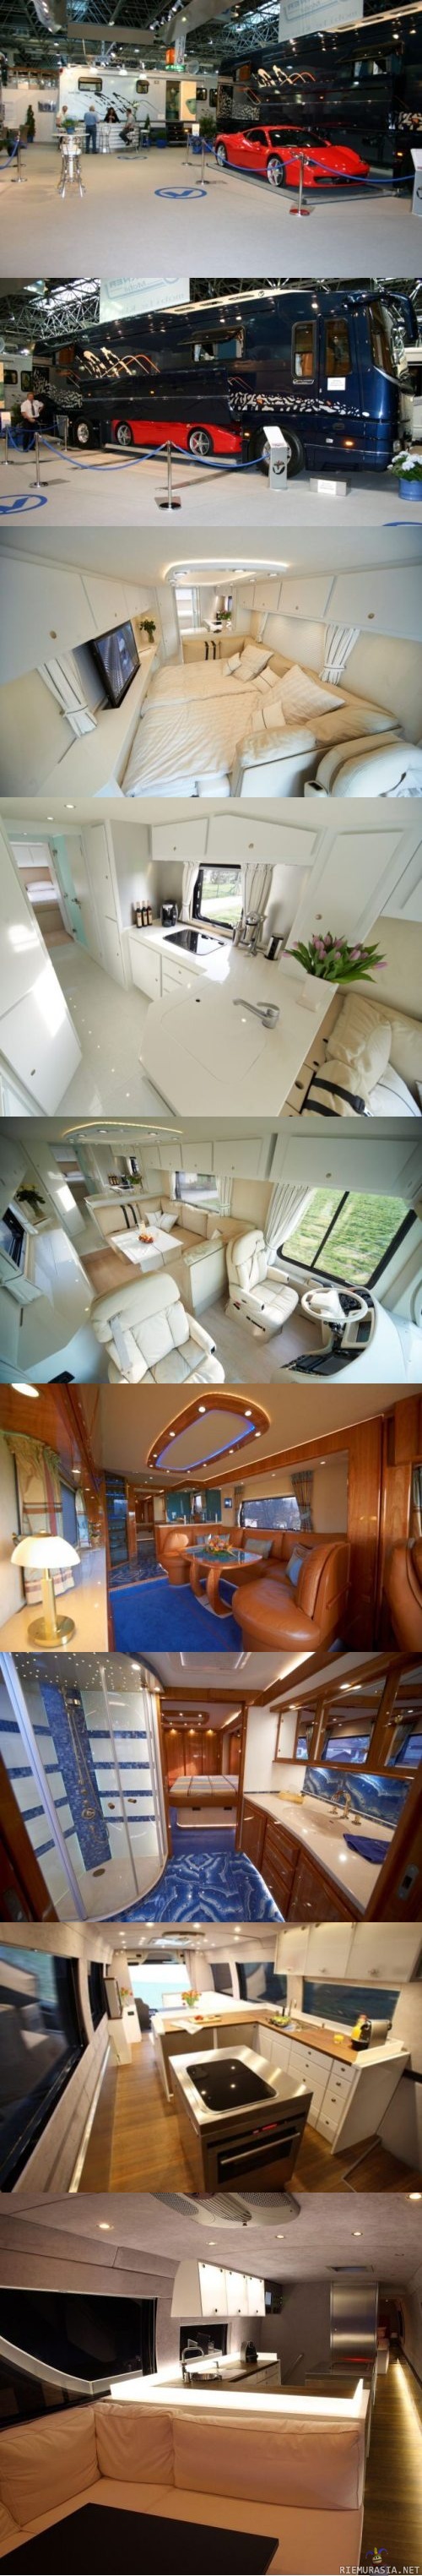 Volkner Mobil Performance Bus - Volkner Mobil Performance Bus is a gorgeous 40 ft. long motorhome.The prices for the super-van range from $1.2 million to $2 million.